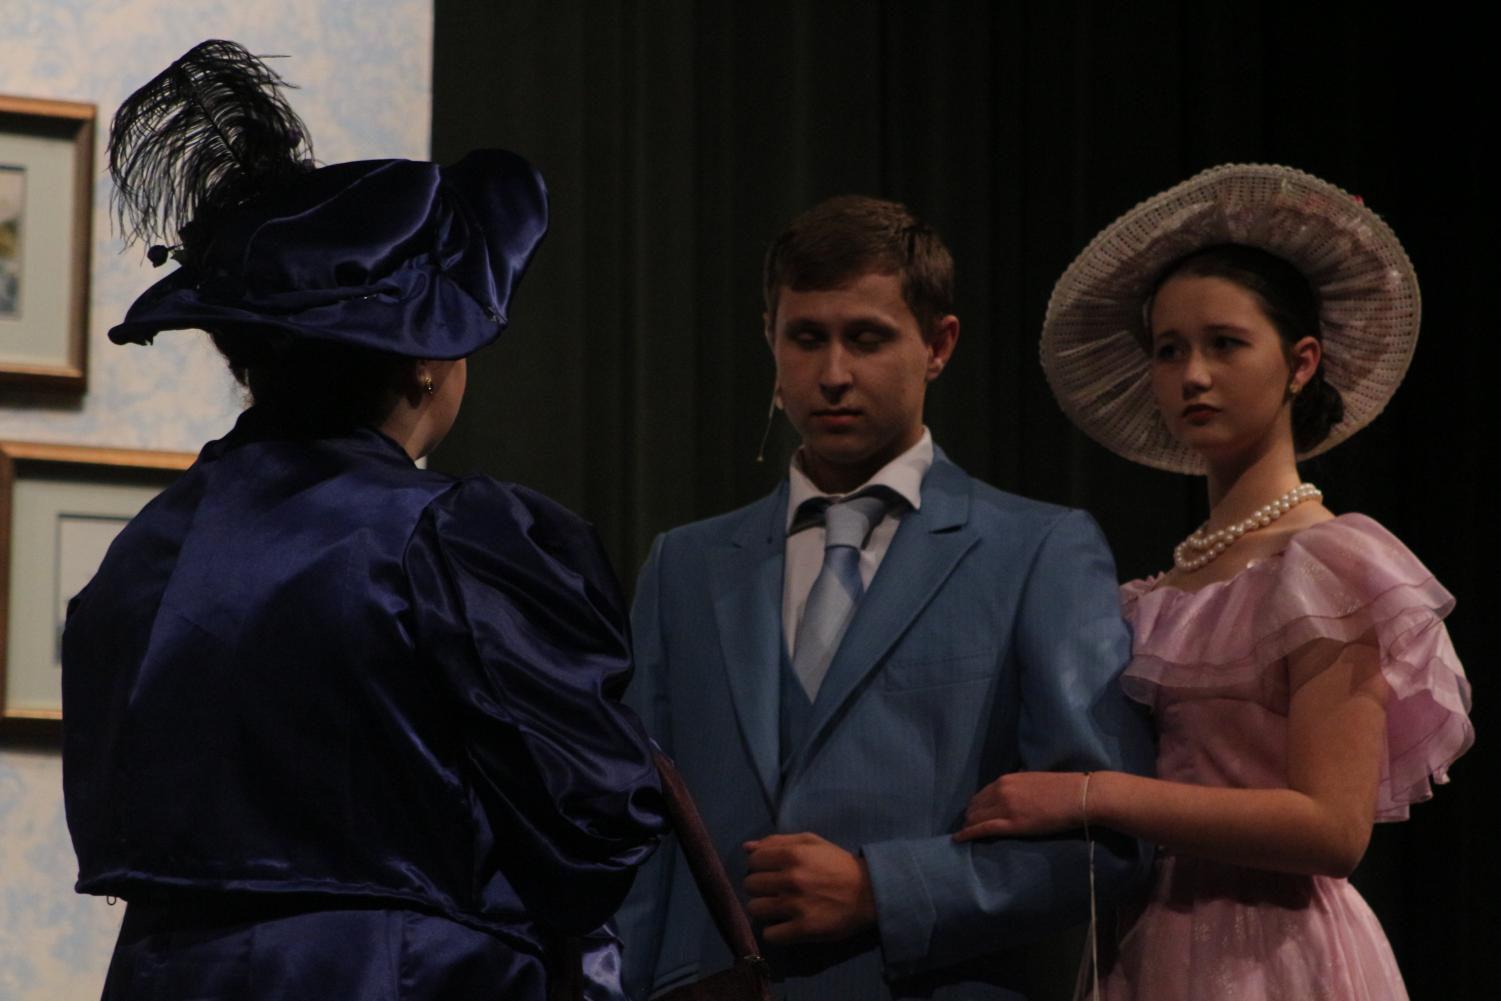 The+Importance+of+Being+Earnest+Drama+Performance++%28Photos+by+Mya+Studyvin%29